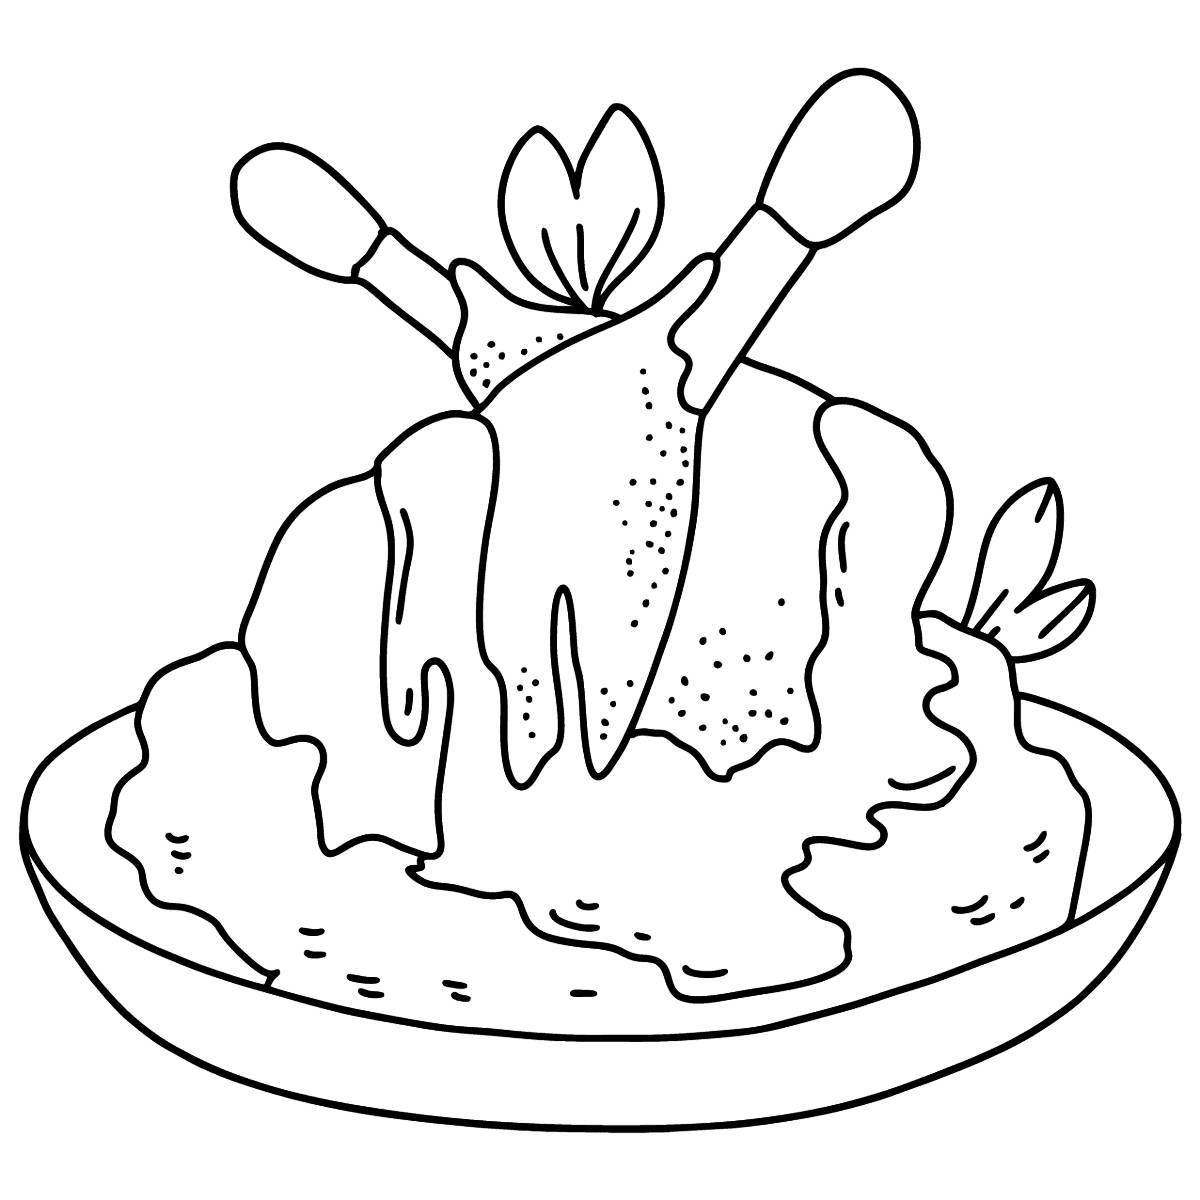 Polite fried chicken coloring page